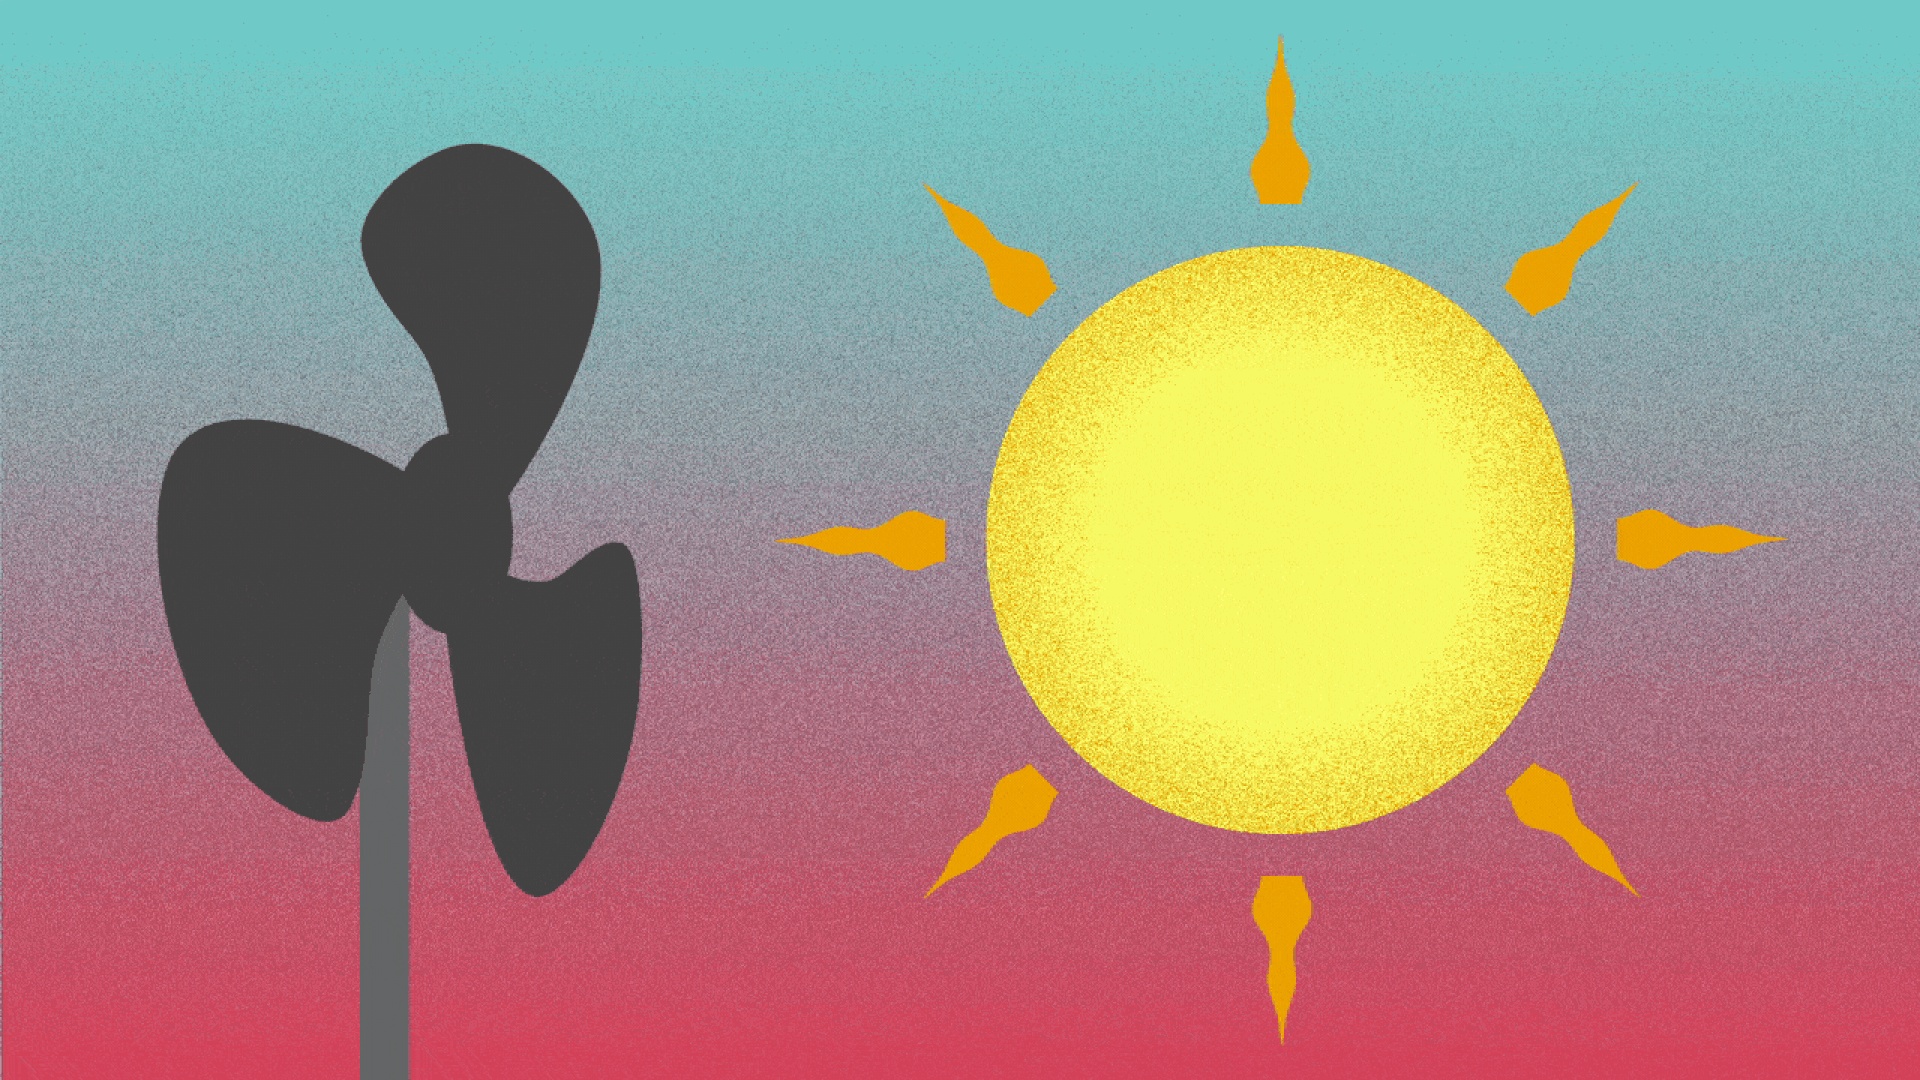 Illustration of a fan blowing on the sun.